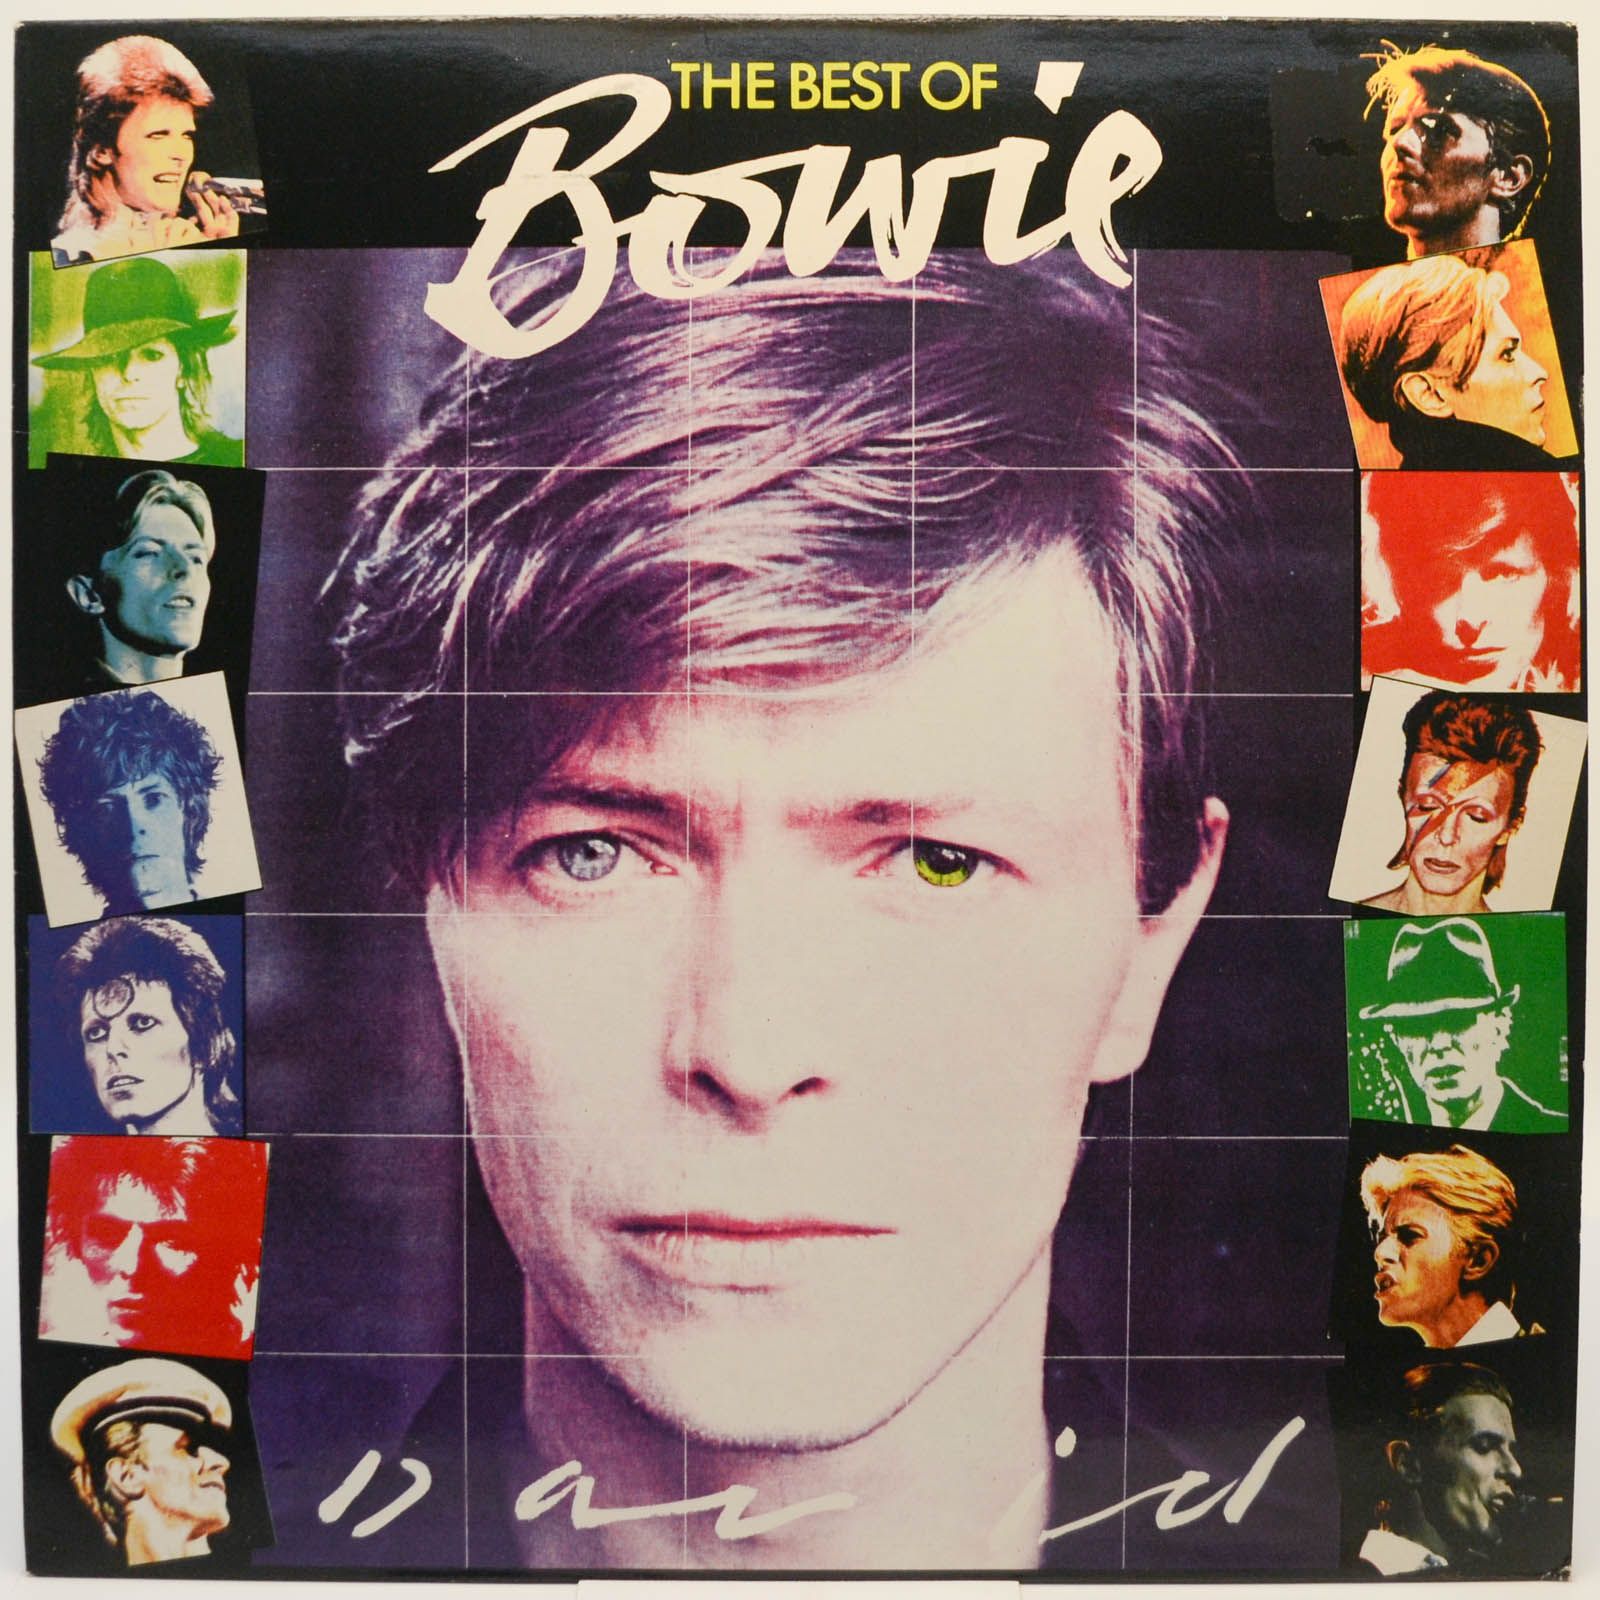 David Bowie — The Best Of Bowie (UK), 1980